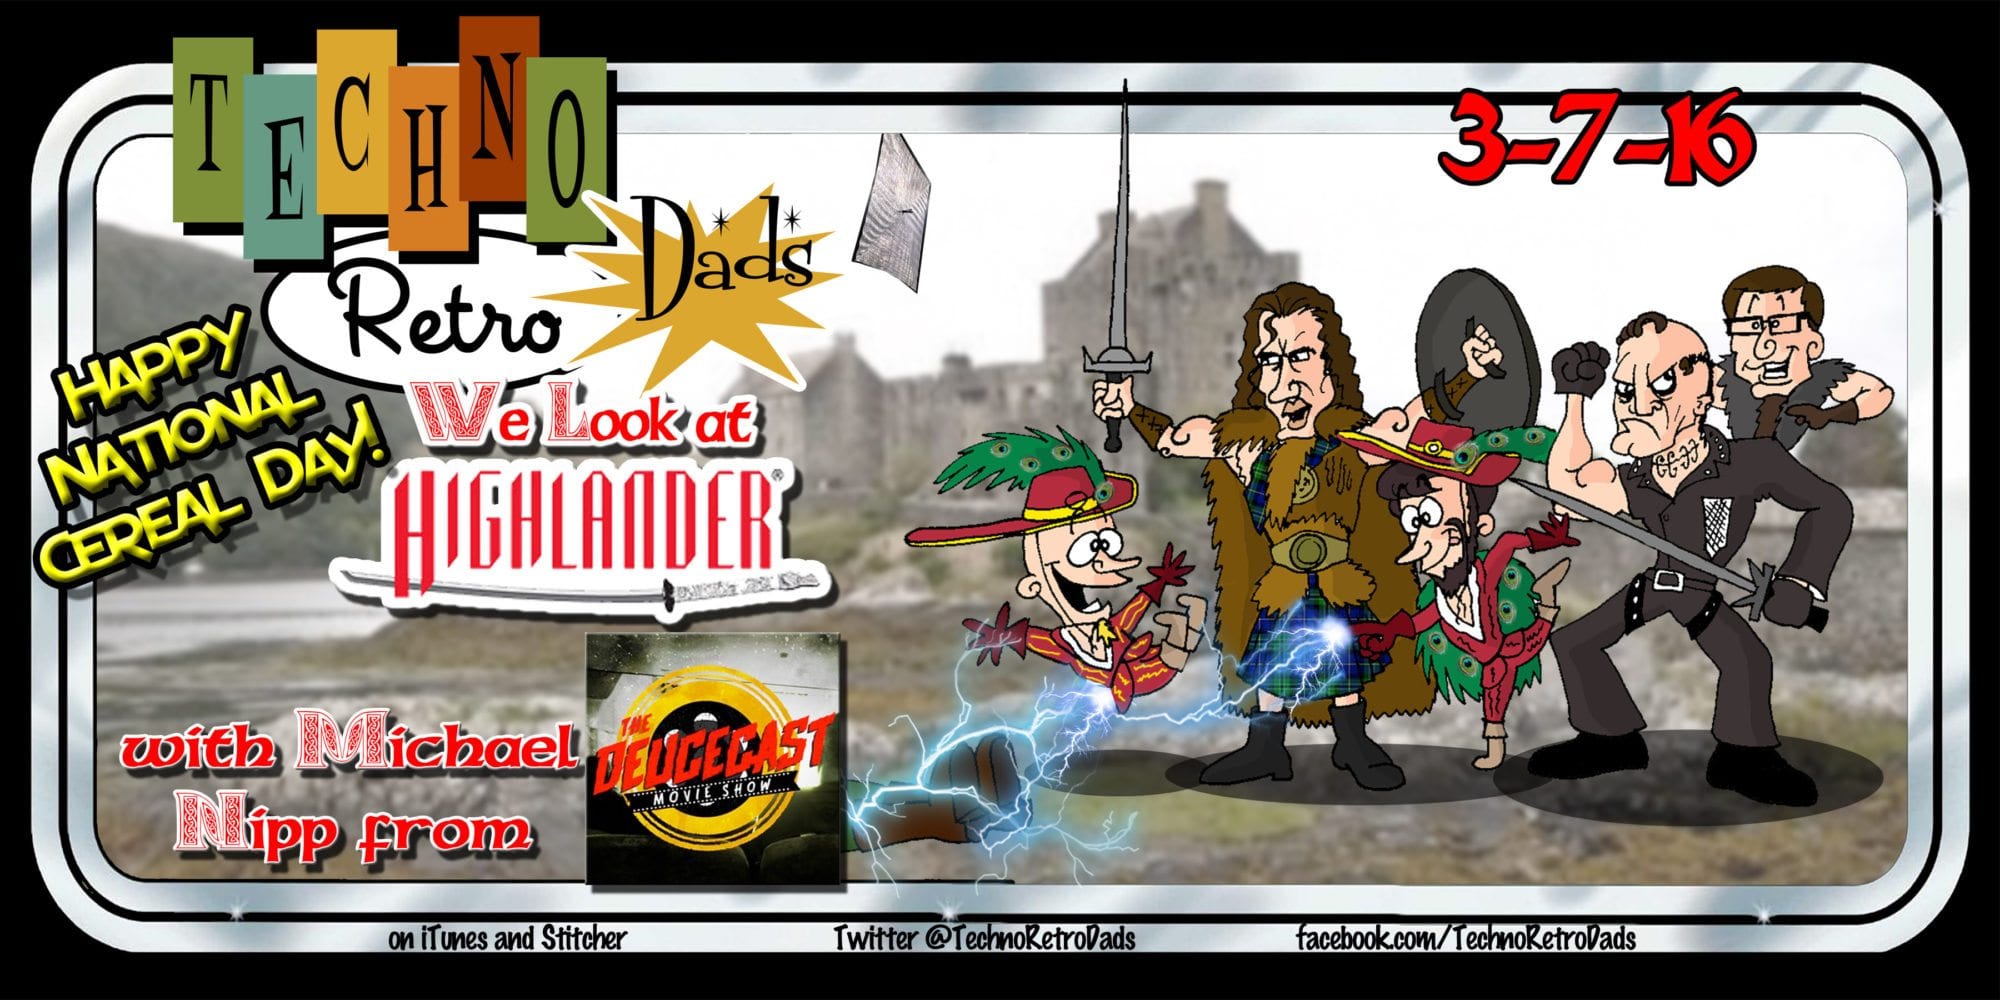 TechnoRetro Dads Remember 30 Years of Highlander with Michael Nipp